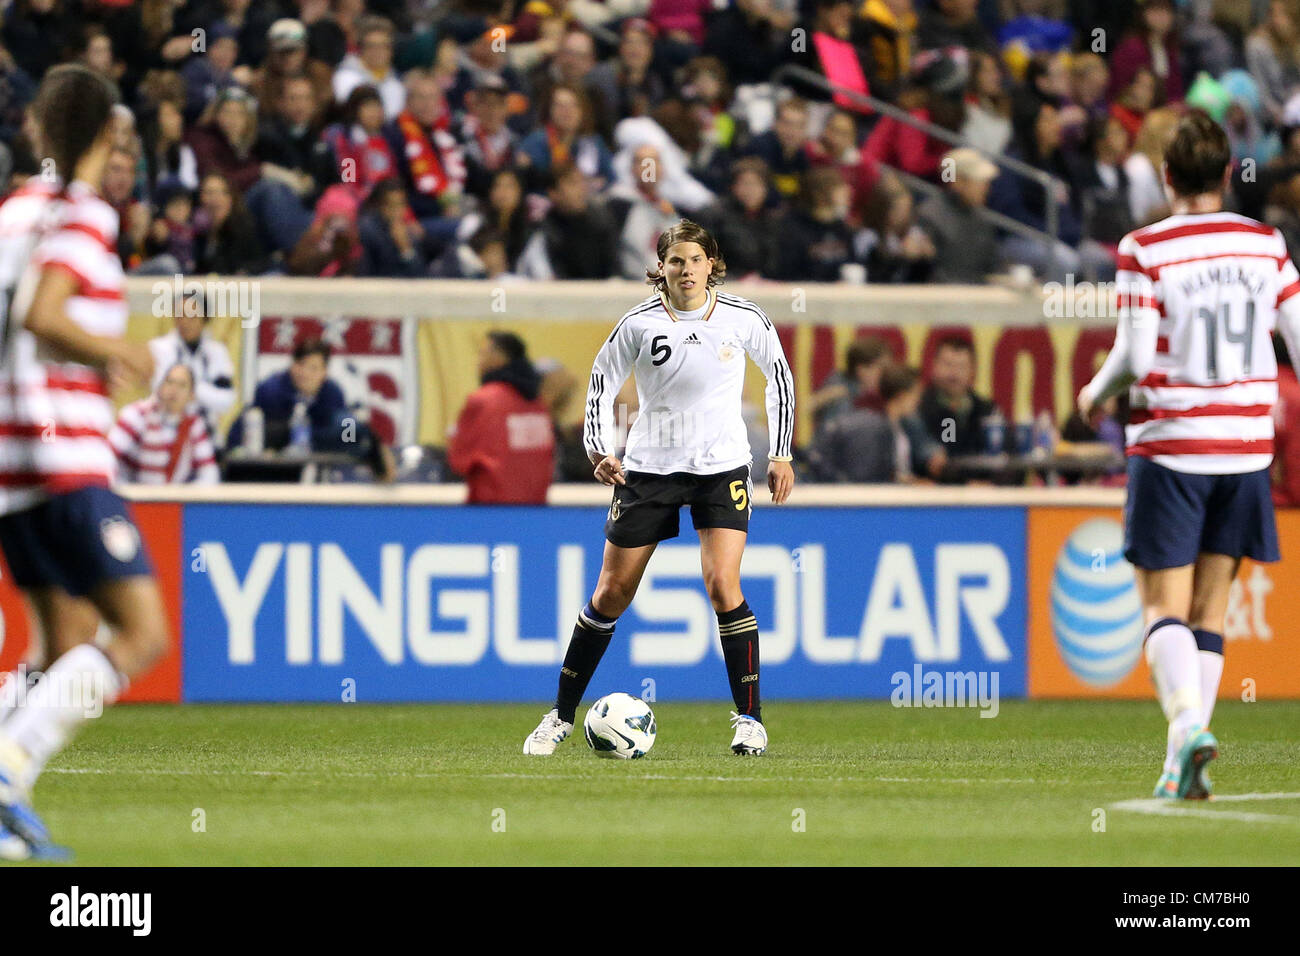 20.10.2012. Chicago, USA.  Annike Krahn (GER). The United States Women's National Team played the Germany Women's National Team at Toyota Park in Bridgeview, Illinois in a women's international friendly soccer match. The game ended in a 1-1 tie. Stock Photo